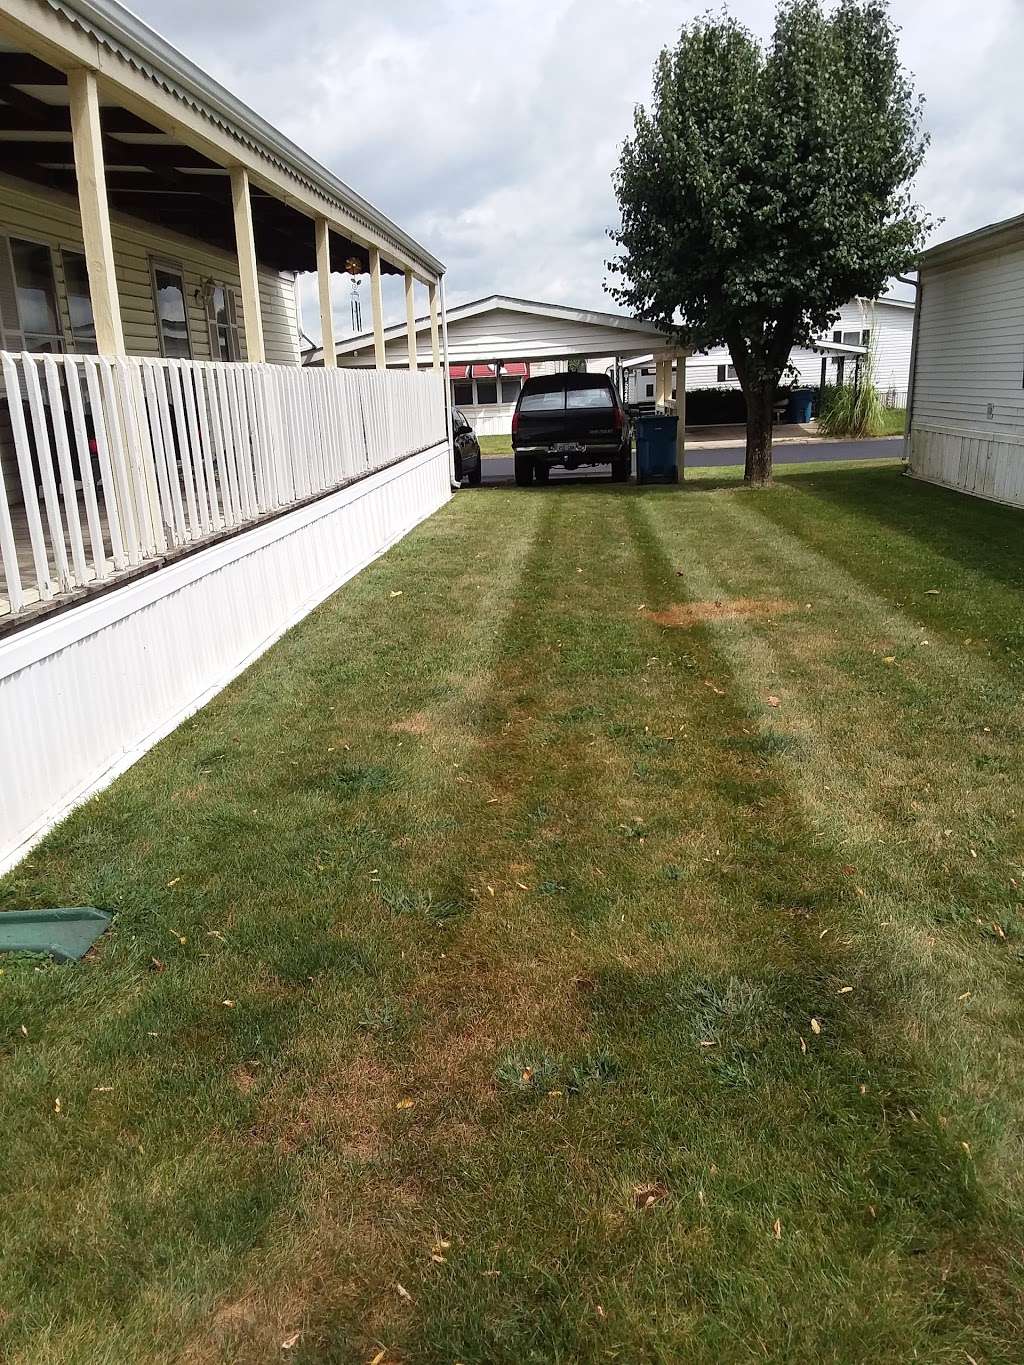 Quail Creek Mobile Home Park | 5410 Dellwood Dr, Indianapolis, IN 46235 | Phone: (317) 823-4285